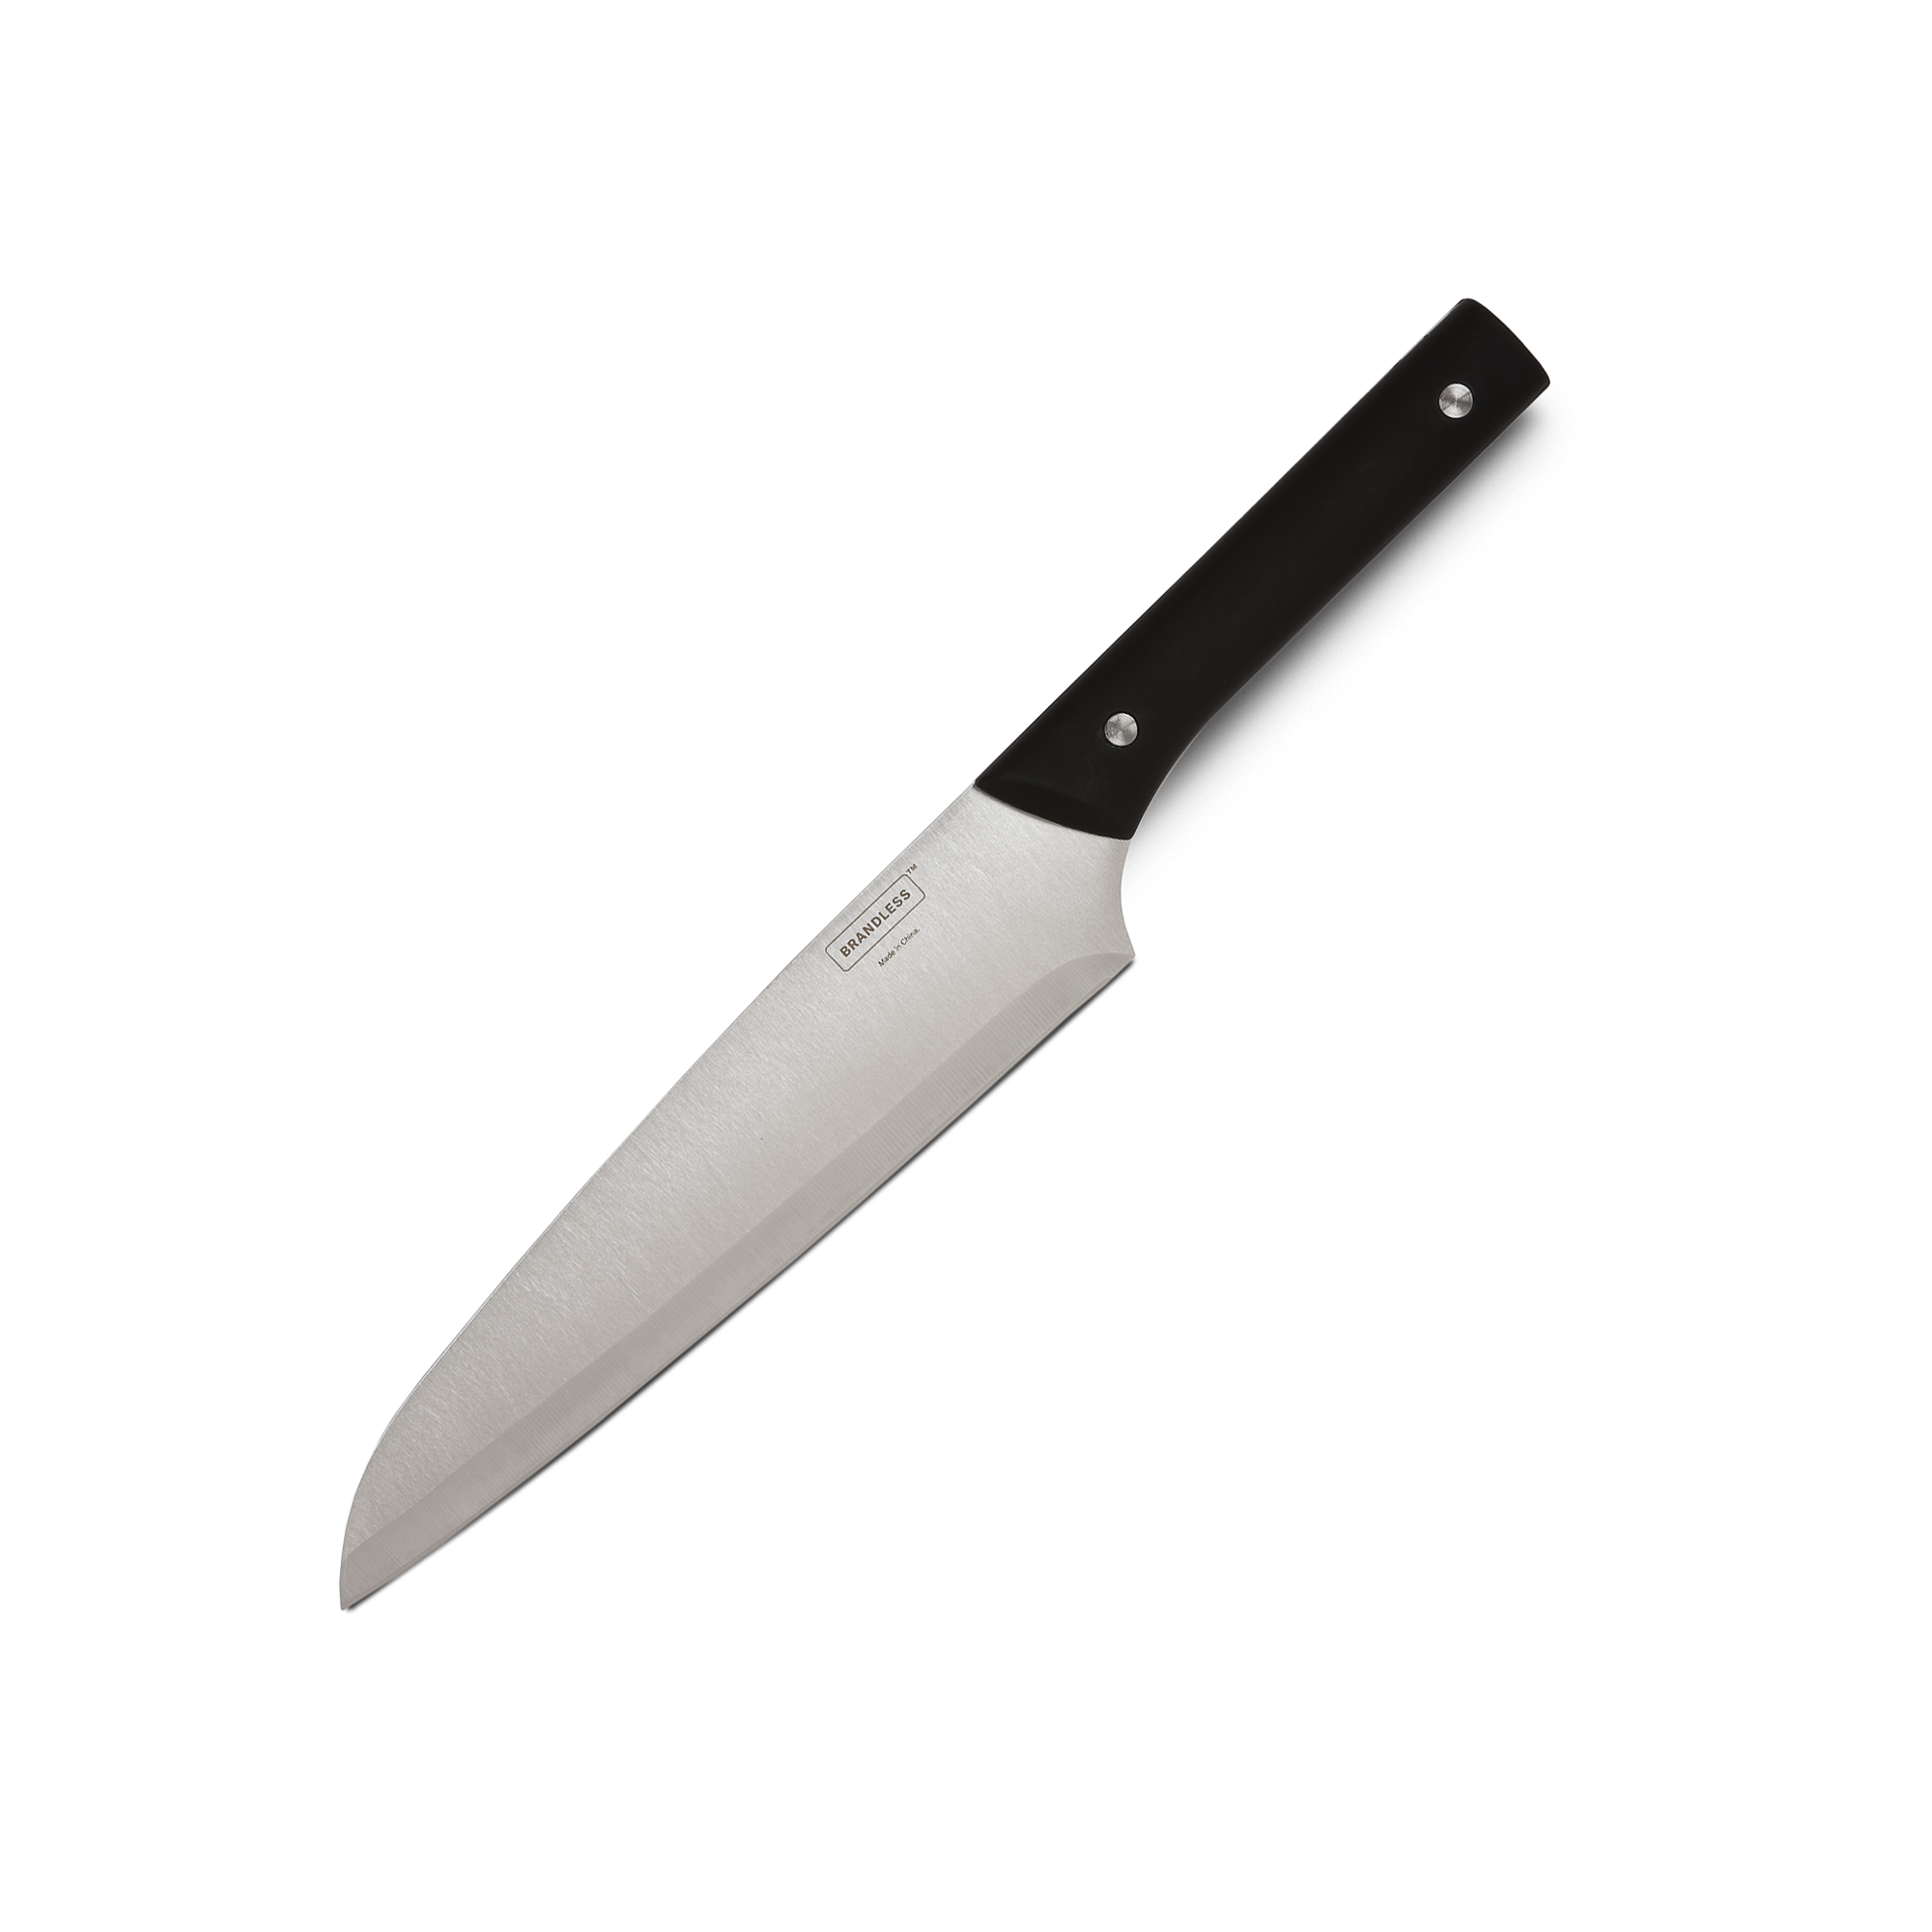 Product photo, 8 inch chef's knife with black riveted handle.